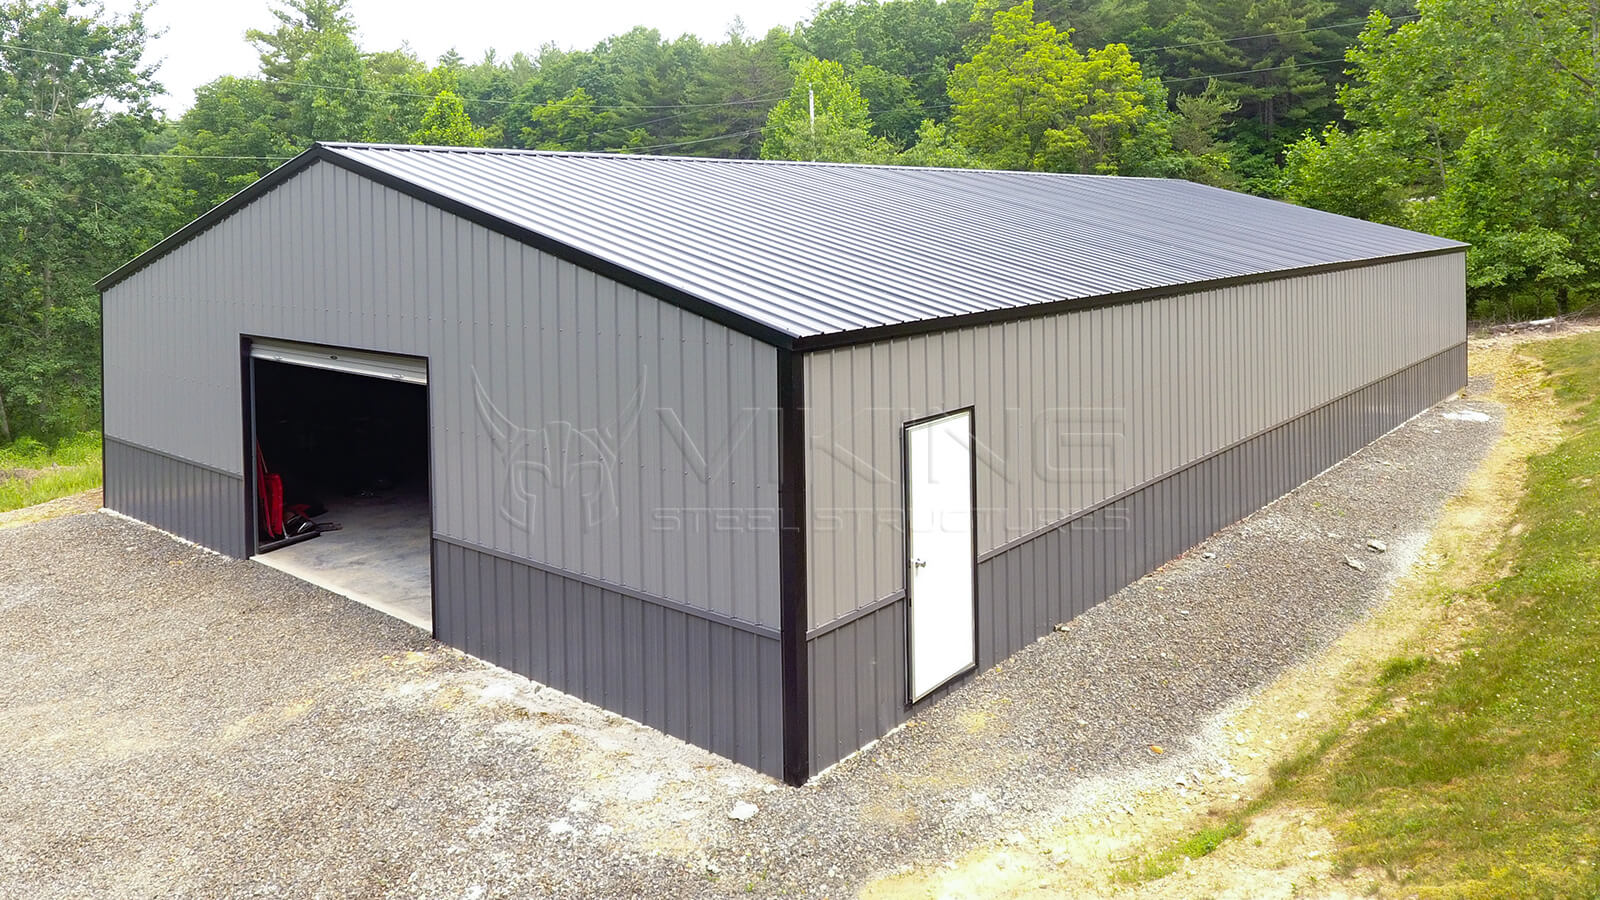 How do you install steel building kits, and what do they contain?